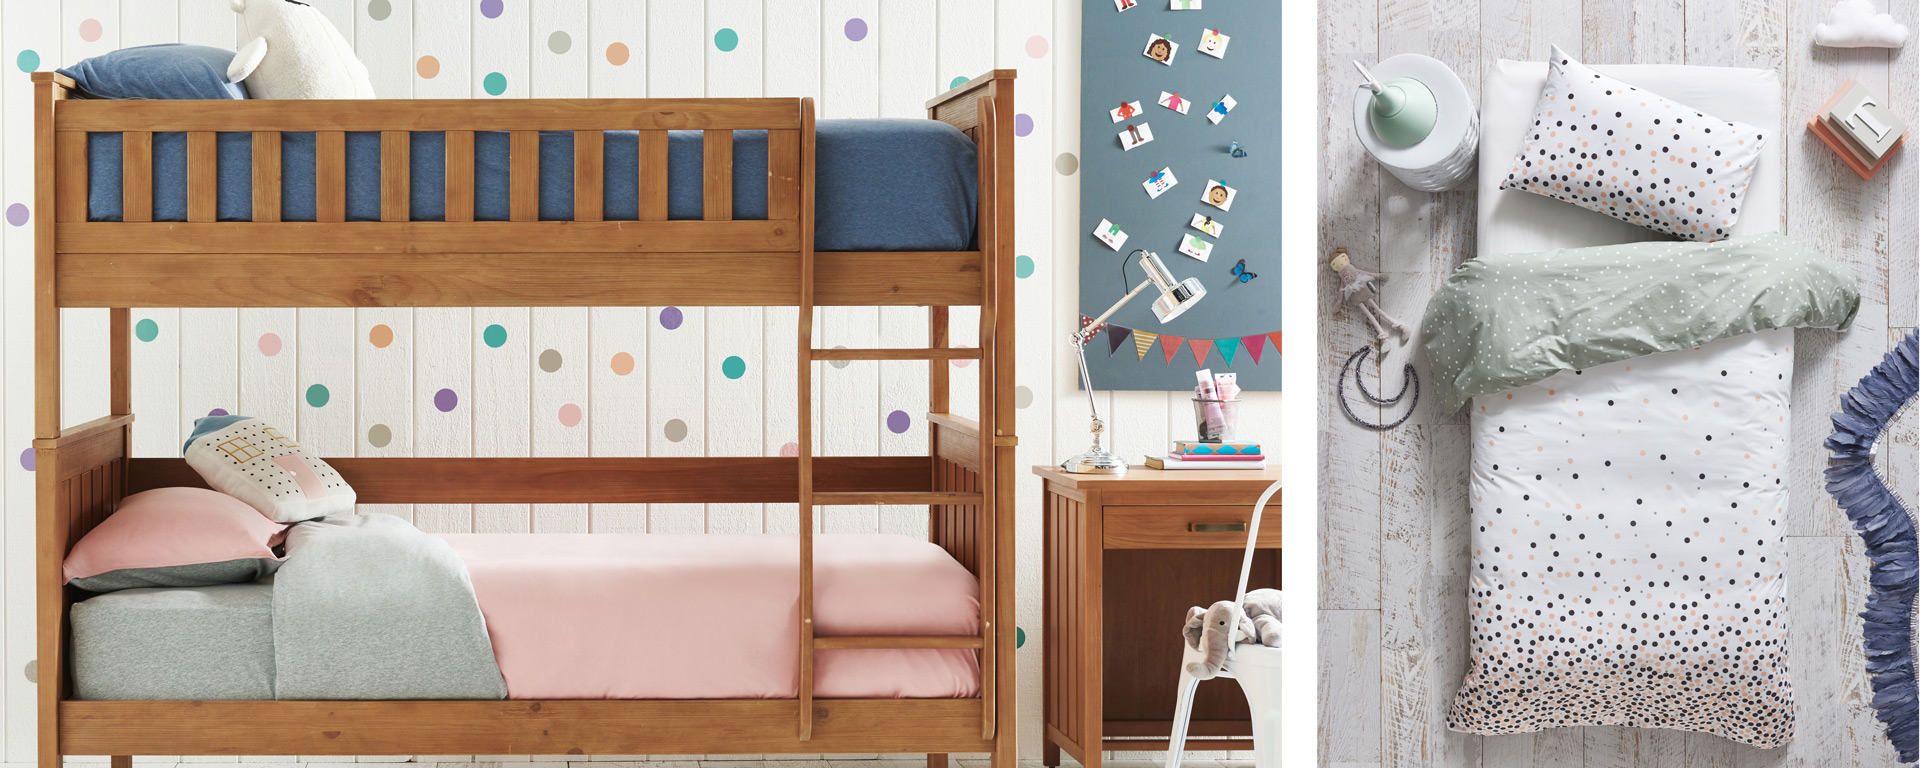 Our Best Bunk Beds And Quilt Covers For Kids This Spring Harvey